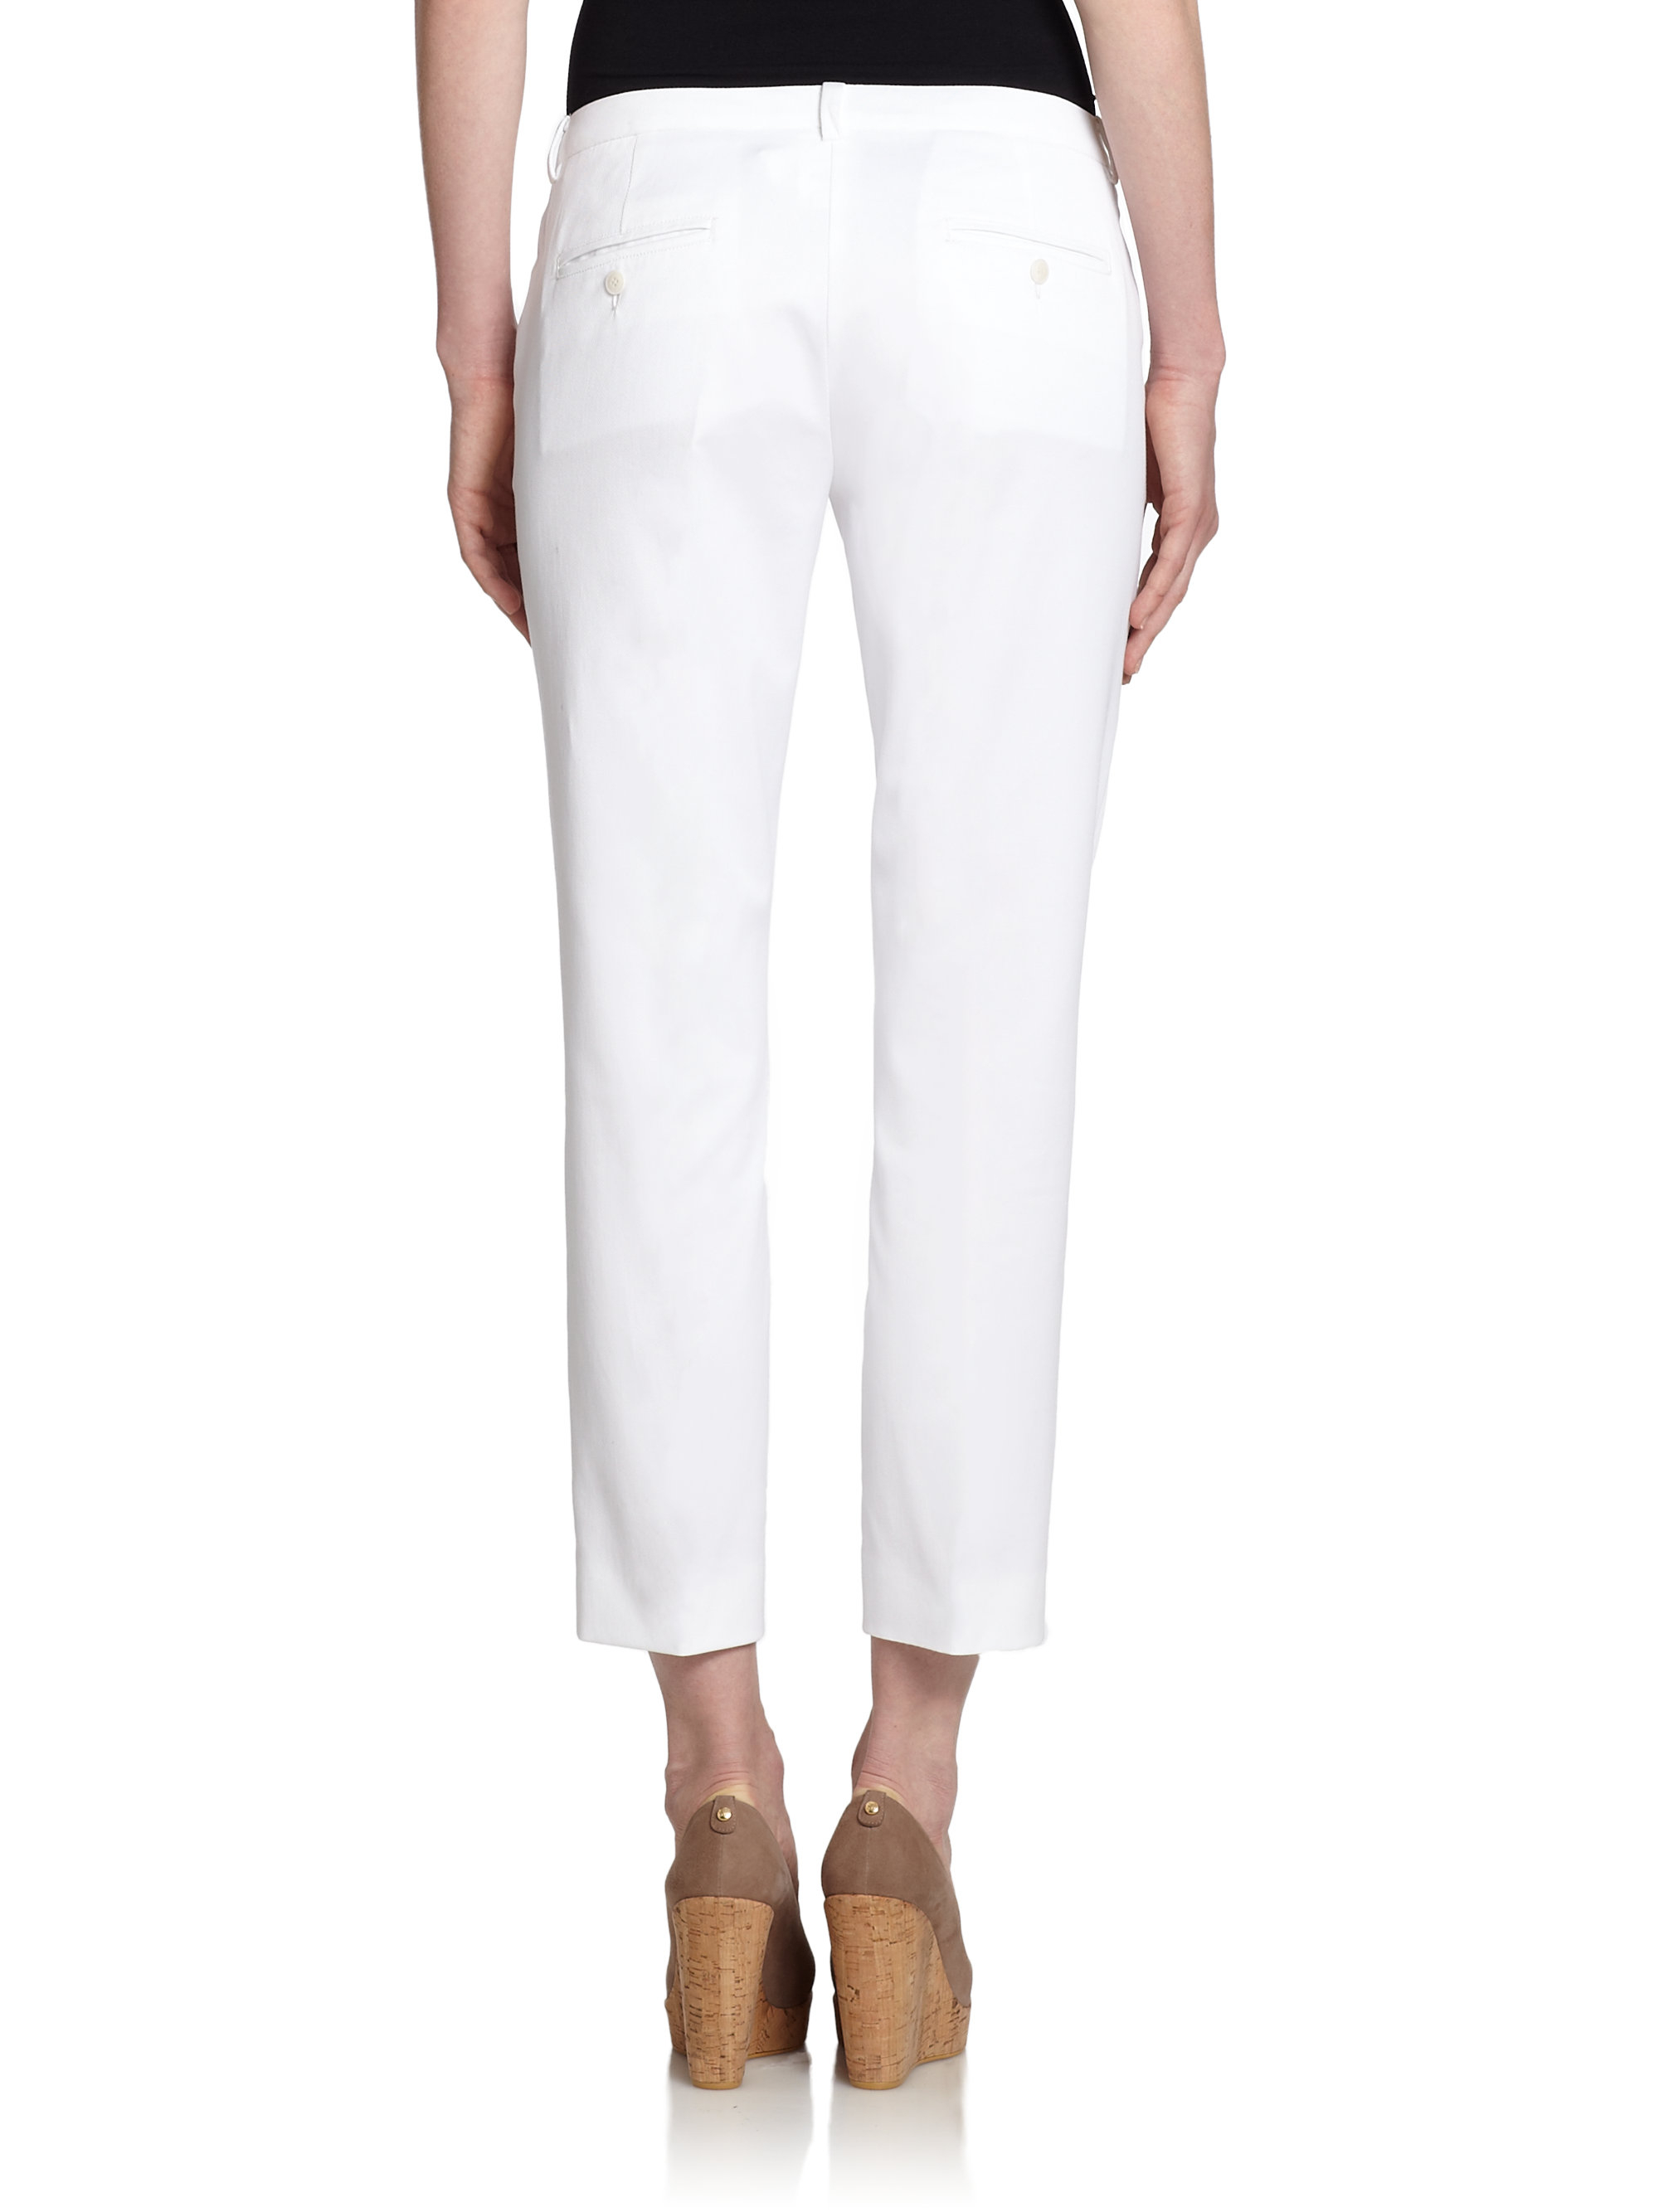 Lyst - Weekend By Maxmara Stretch Cotton Capri Pants in White